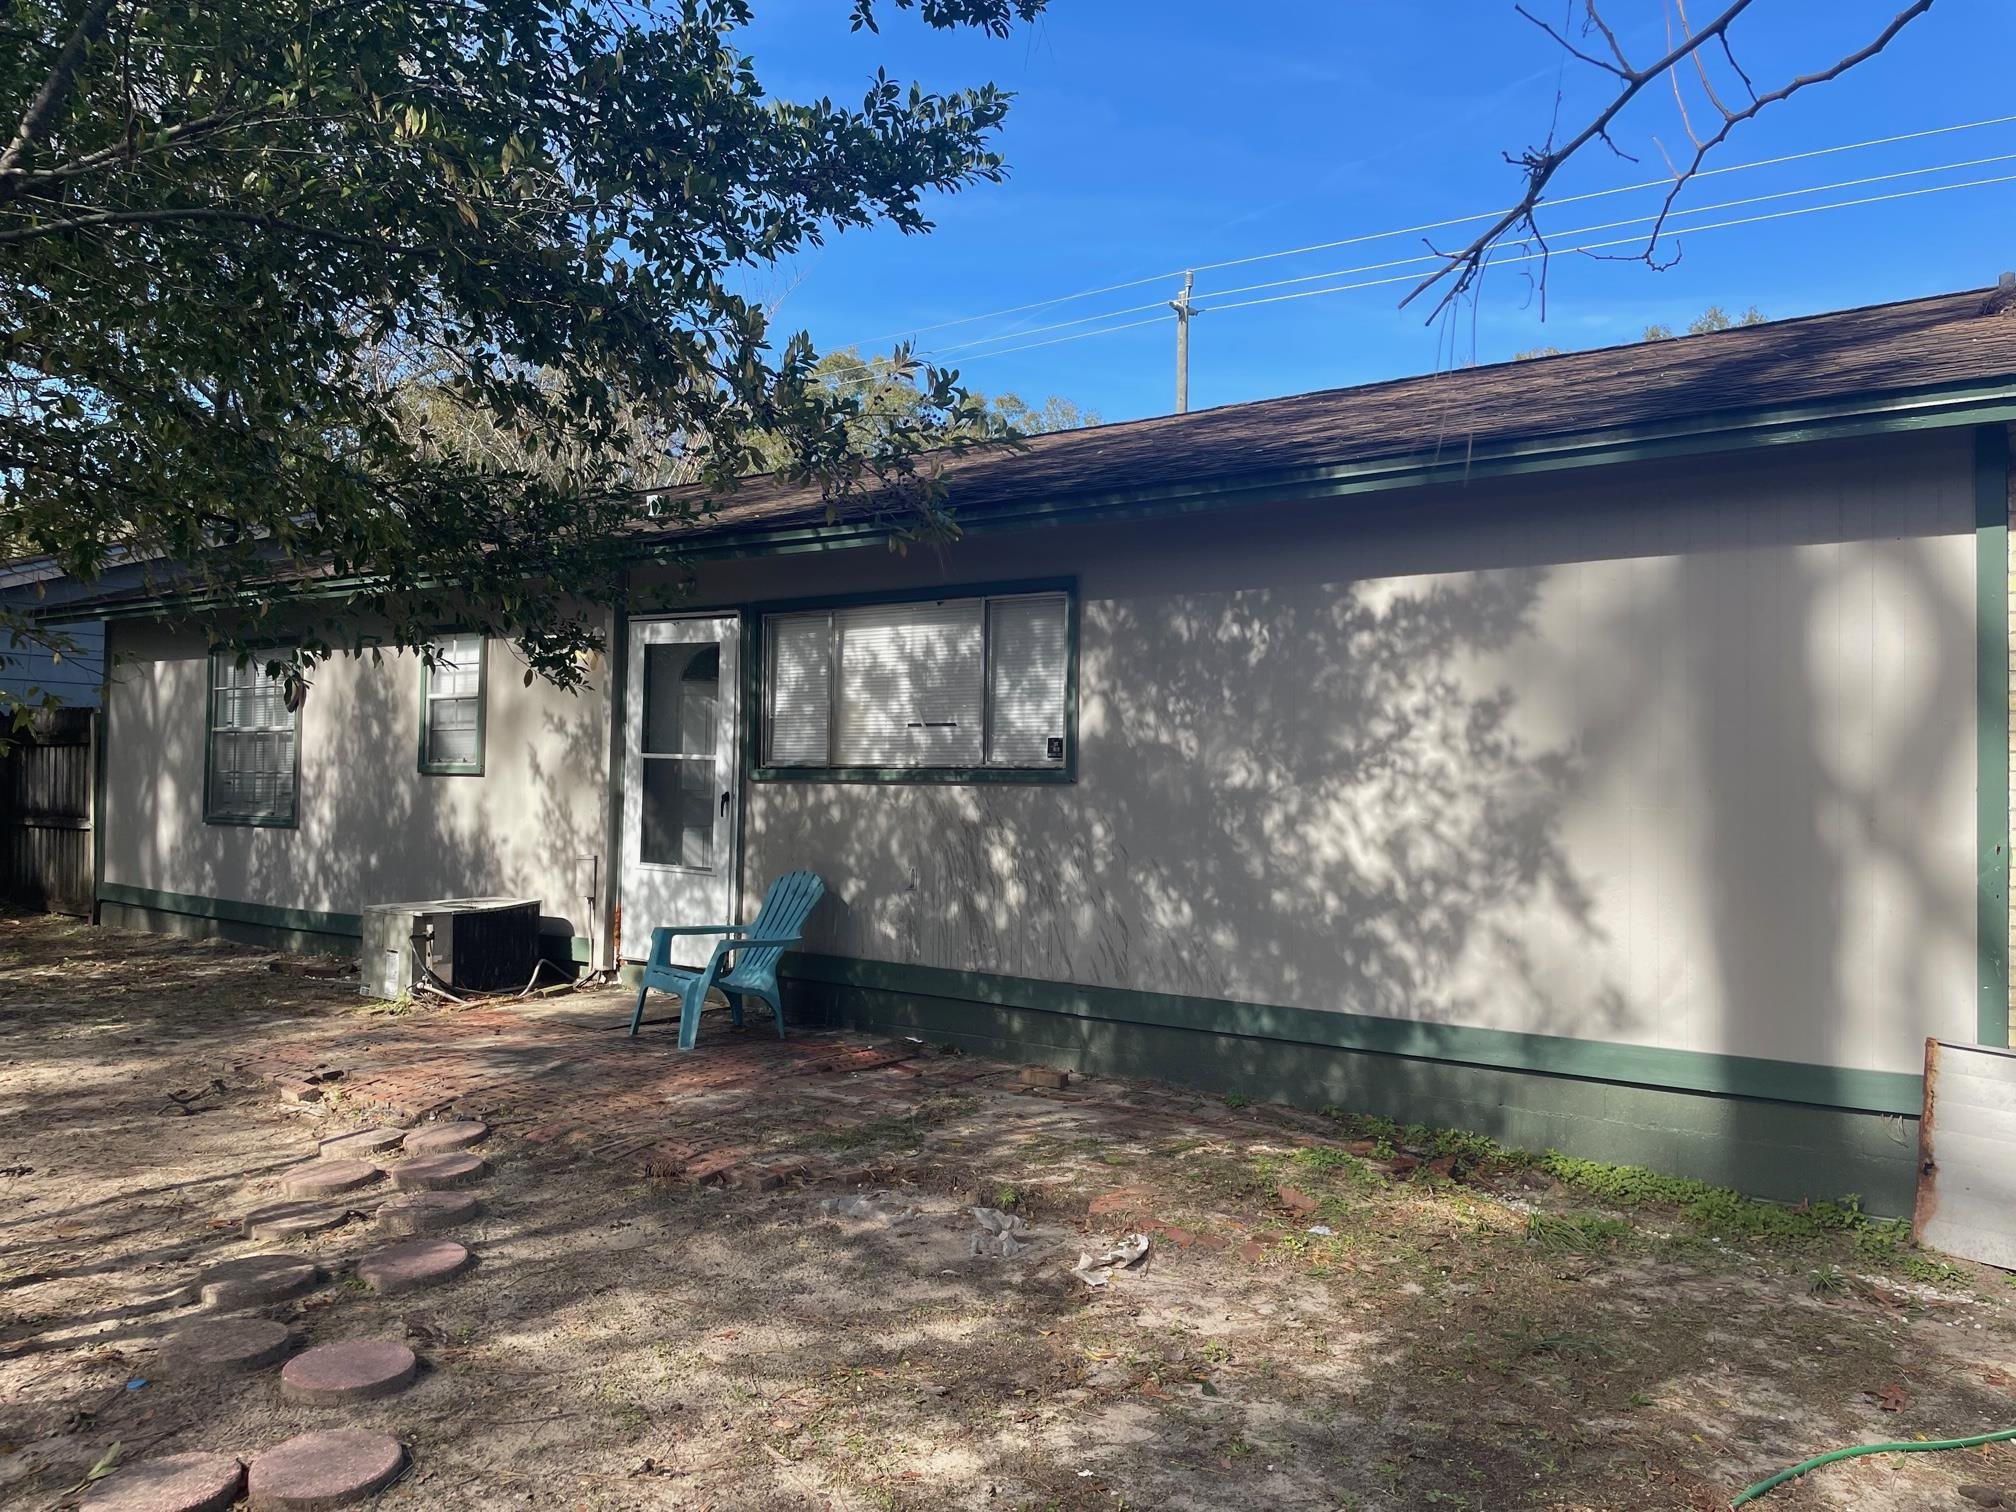 265 Ross Road,TALLAHASSEE,Florida 32305,4 Bedrooms Bedrooms,2 BathroomsBathrooms,Detached single family,265 Ross Road,367450